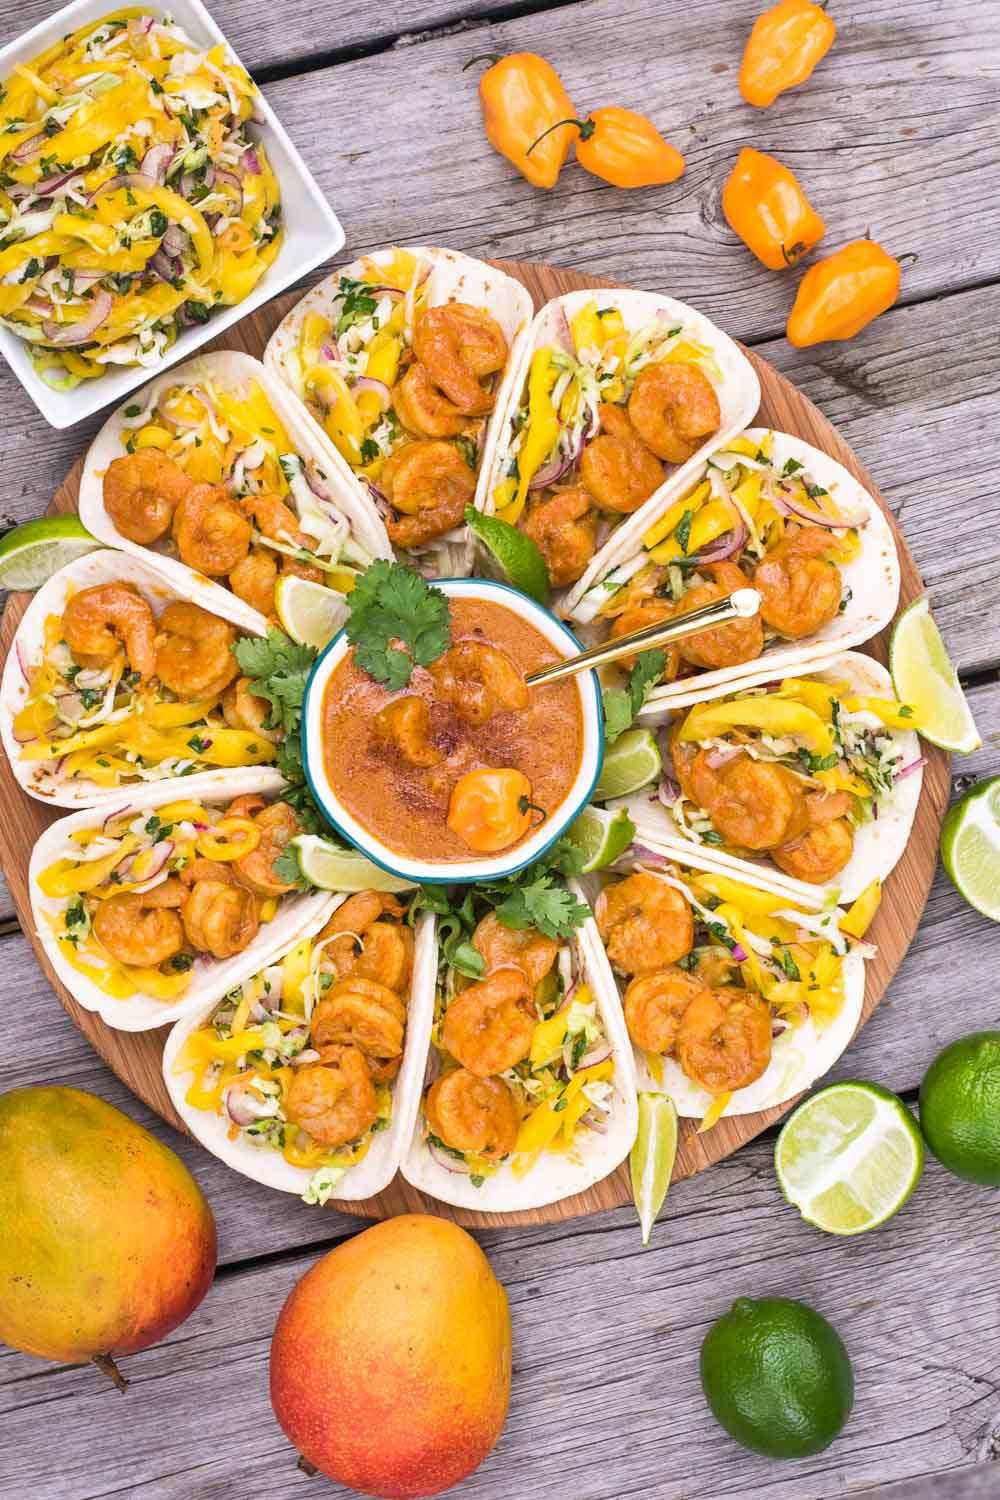 Spicy-sweet-crunchy-soft shrimp tacos are our summer anthem! Perfect excuse to marry Indian & Mexican with the bright, peppy flavors of mango & habanero.